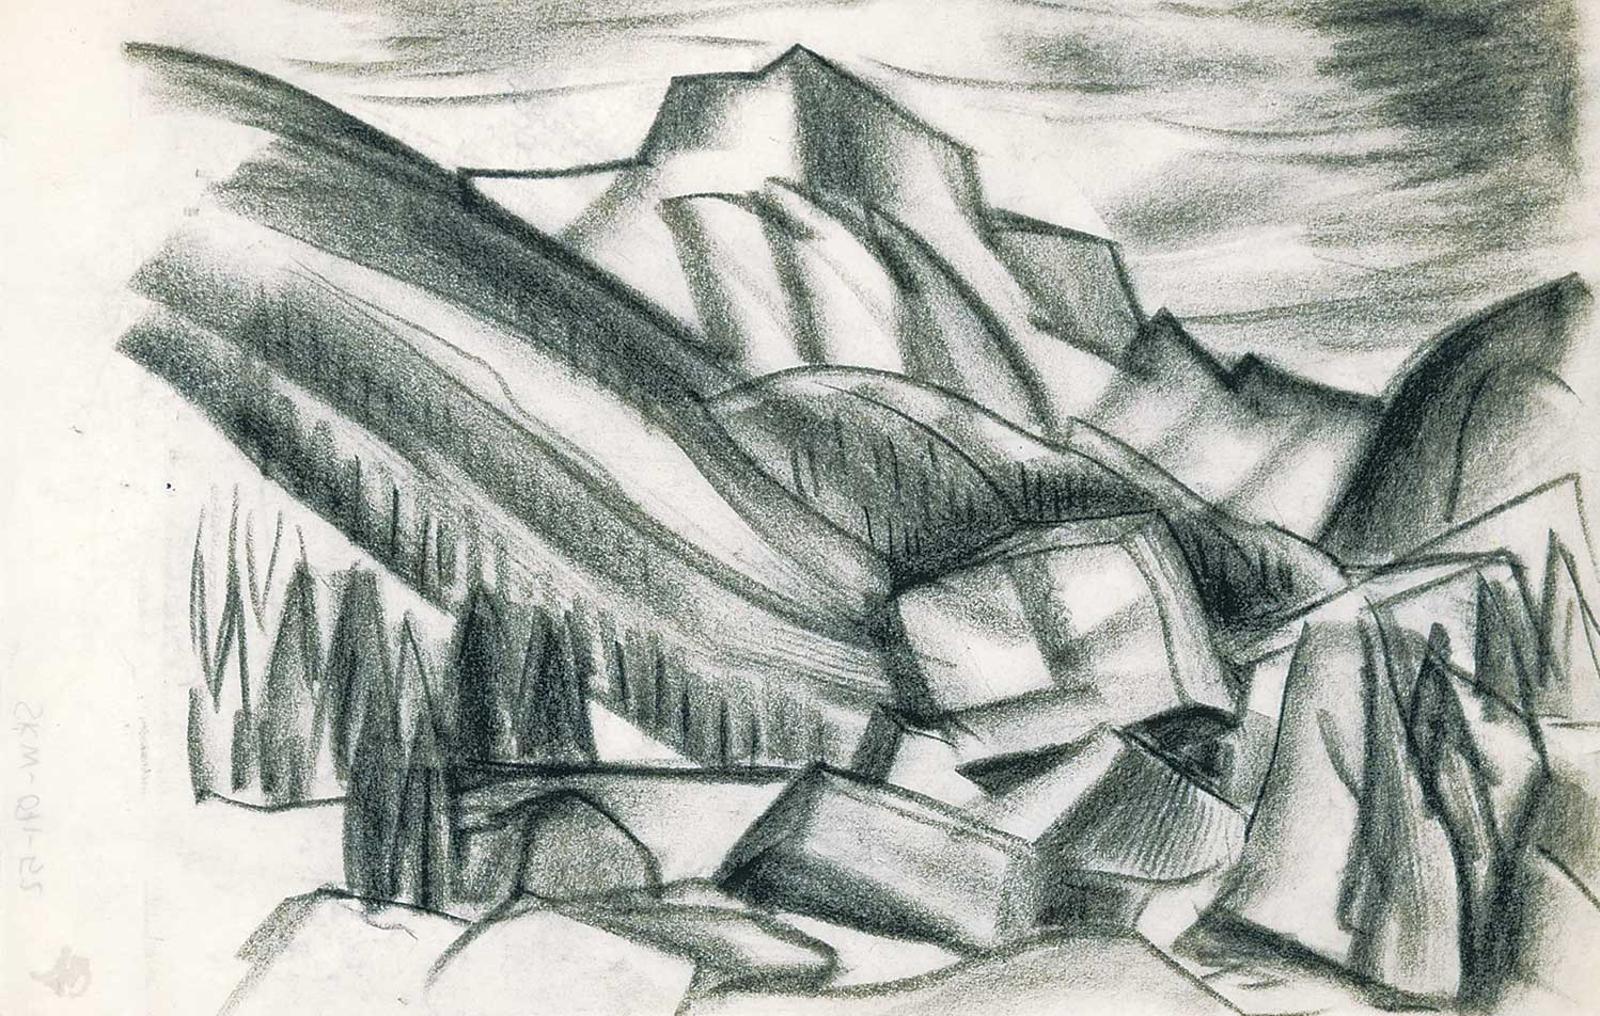 Andre Charles Bieler (1896-1989) - Untitled - Rocky Mountains, Banff